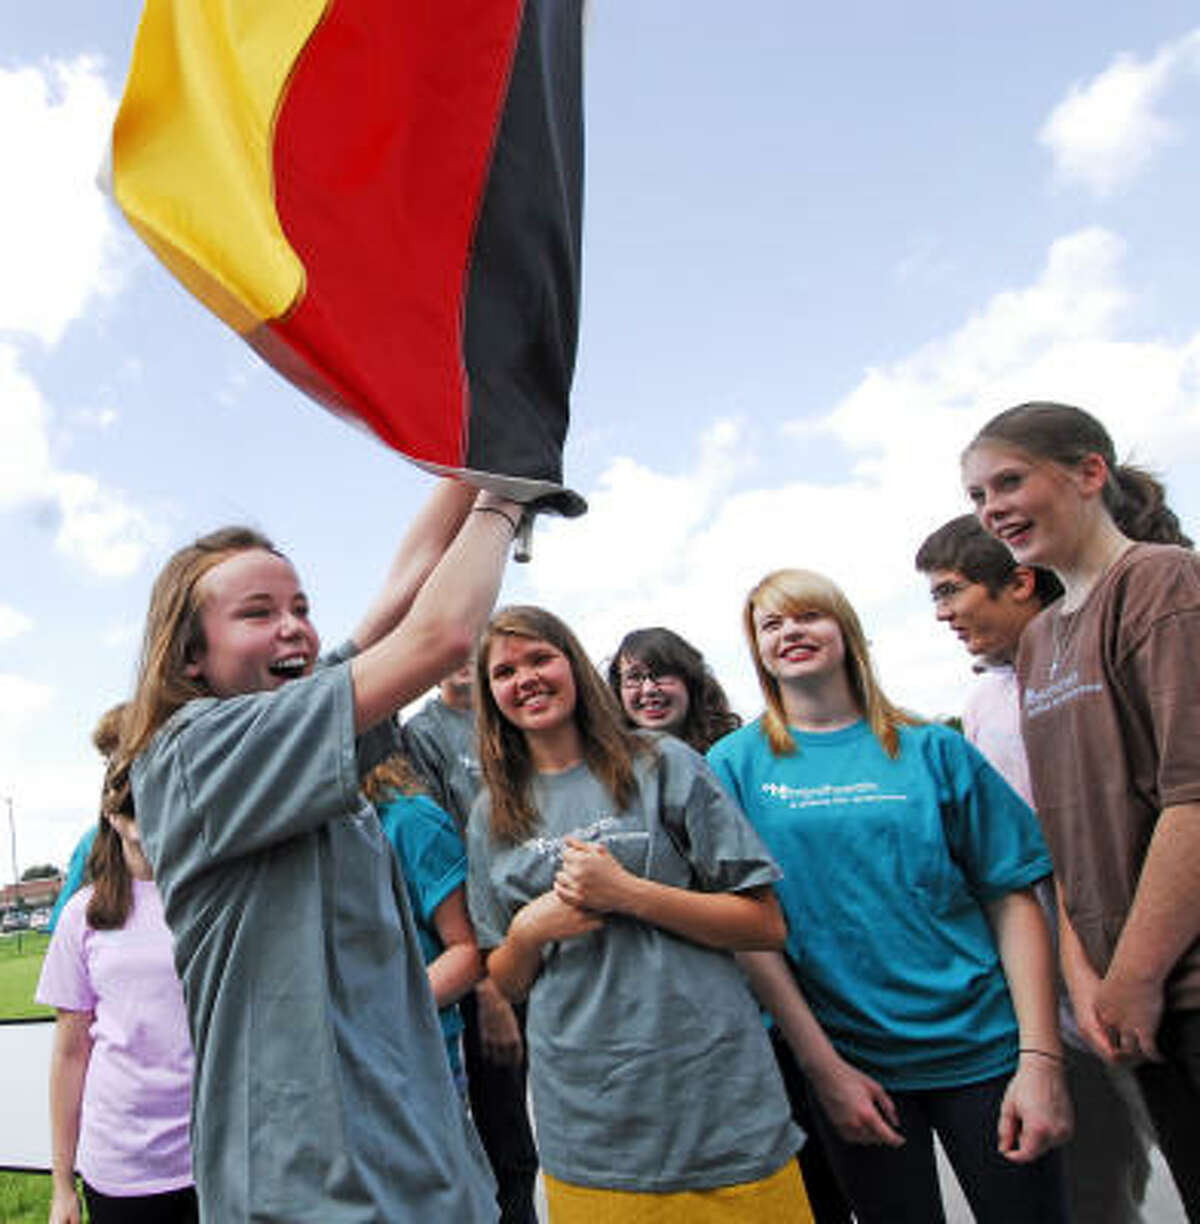 Fifteen year old Katherine Dumanoir (cq) (at left) (77450) carries the German flag for a group photo of high school students from Living Word Lutheran Church in Katy who are traveling to Germany to learn more about Martin Luther. Going on the trip with her are fifteen year old Darby Dillard (cq) (shoulder length brown hair) (77450), sixteen year old Katy Aus (cq) (glasses and curly black hair) (77494), fifteen year old Lauren Simmons (cq) (blonde hair) (77094), seventeen year old Richard Reid (cq) (glasses) (77494), and seventeen year old Jennifer Spain (cq) (brown shirt hair in ponytail) (77450).